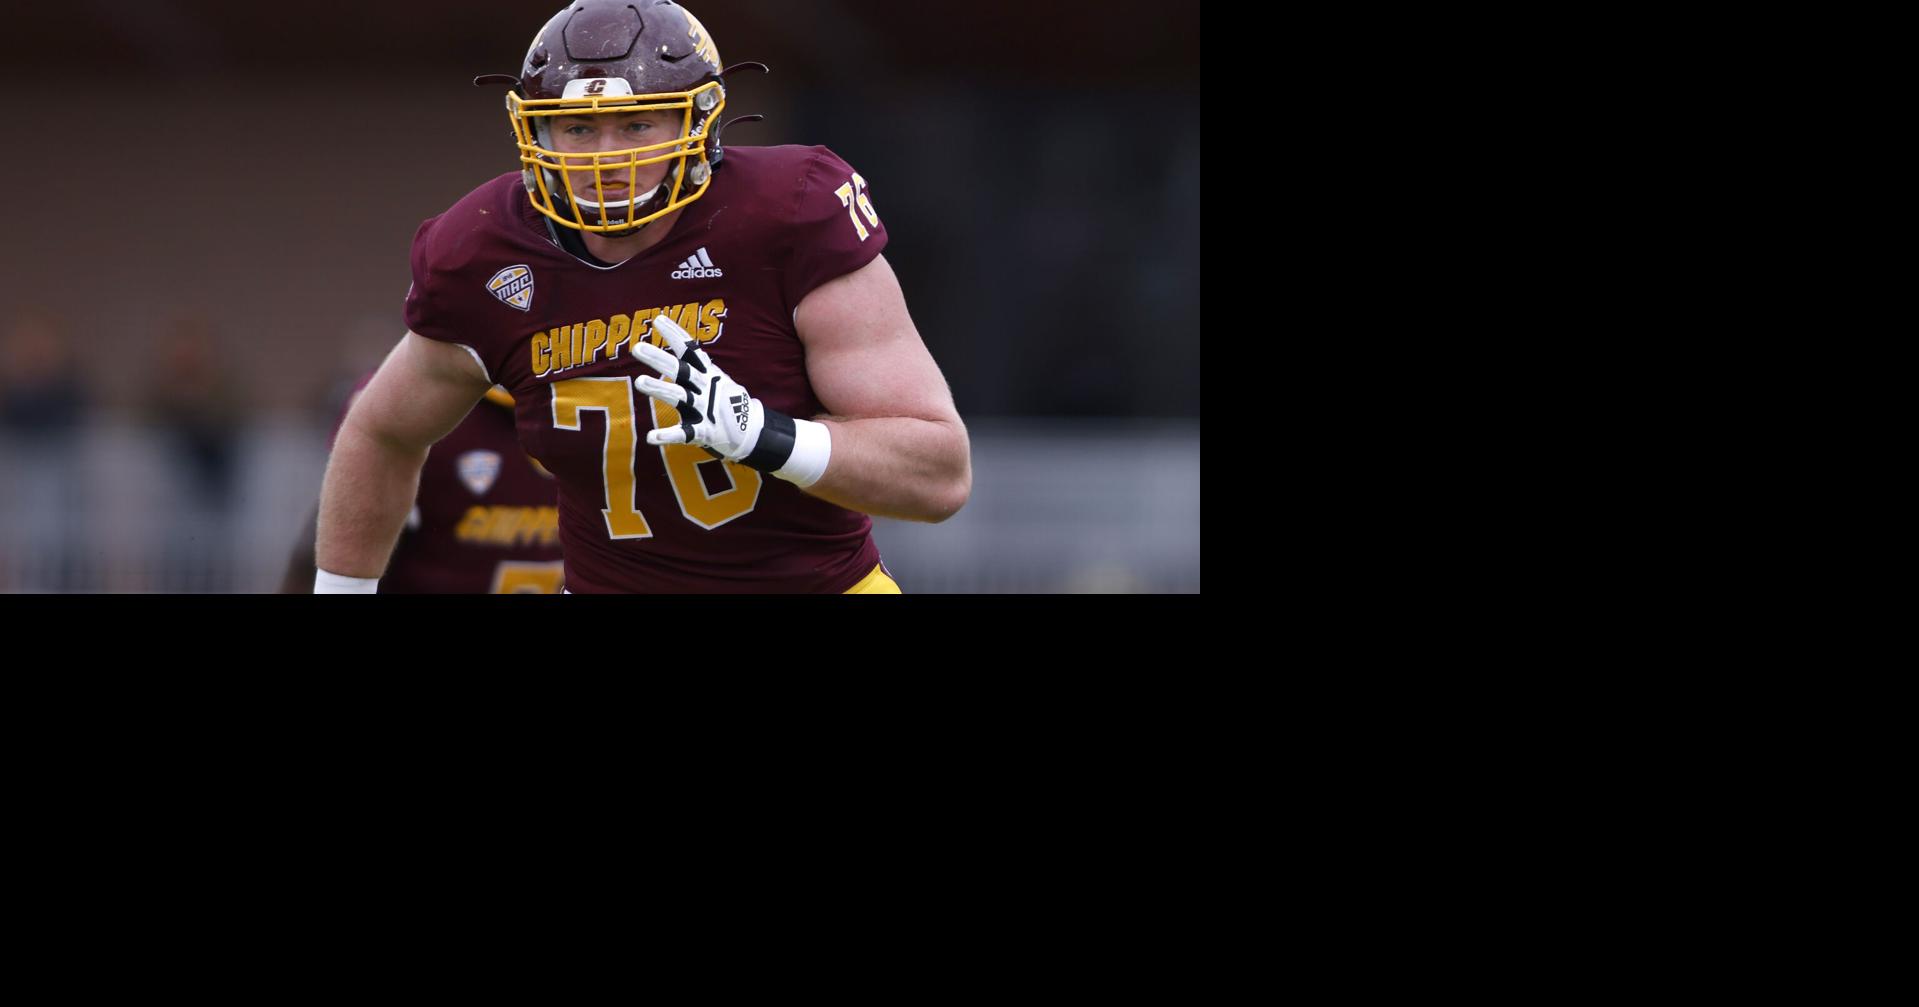 Draft Preview: Central Michigan OT Raimann has undeniable potential, Colts